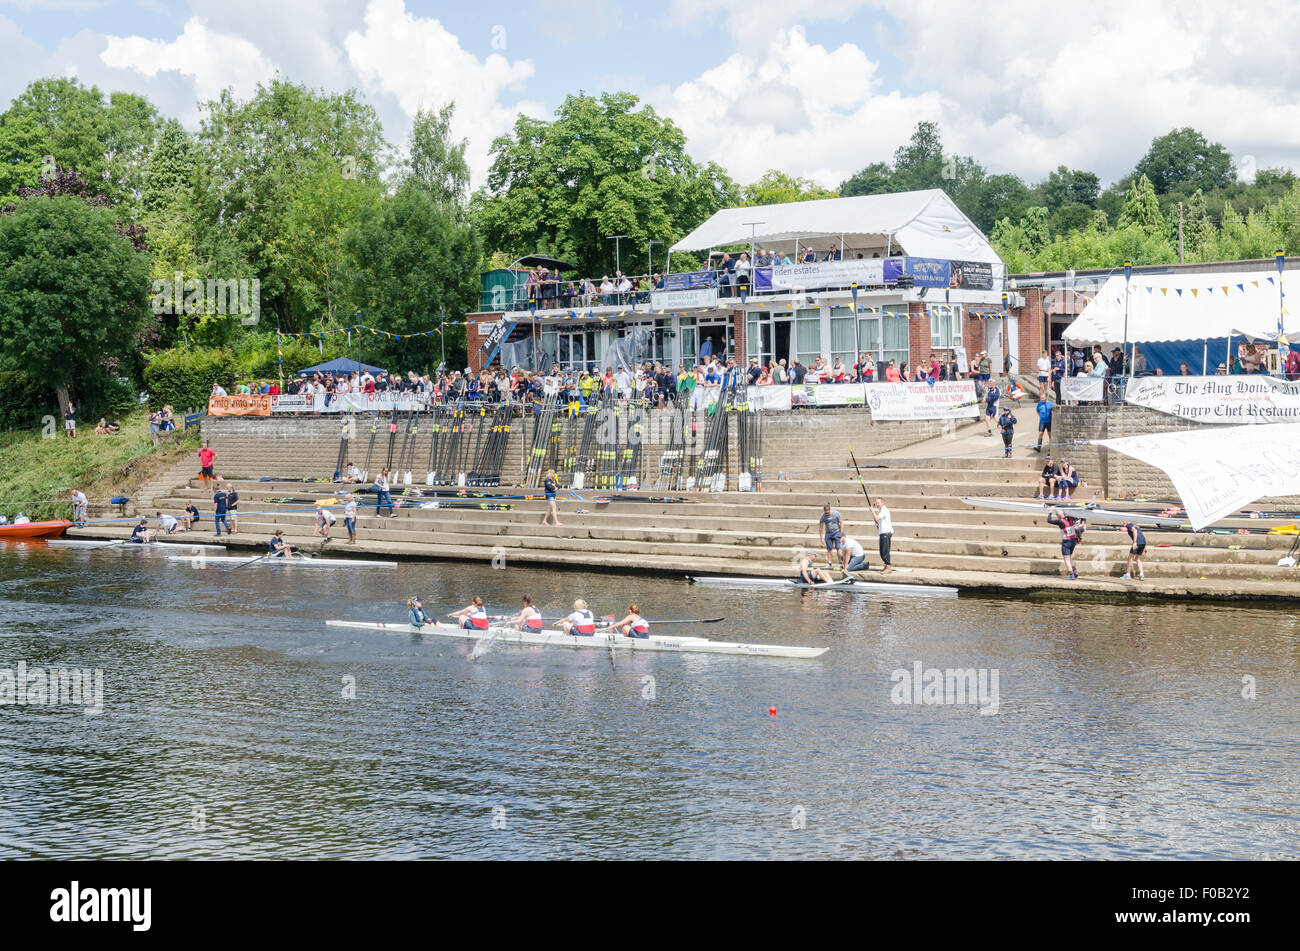 Bewdley Rowing Club Regatta on the bank of the River Severn in Bewdley, Worcestershire Stock Photo